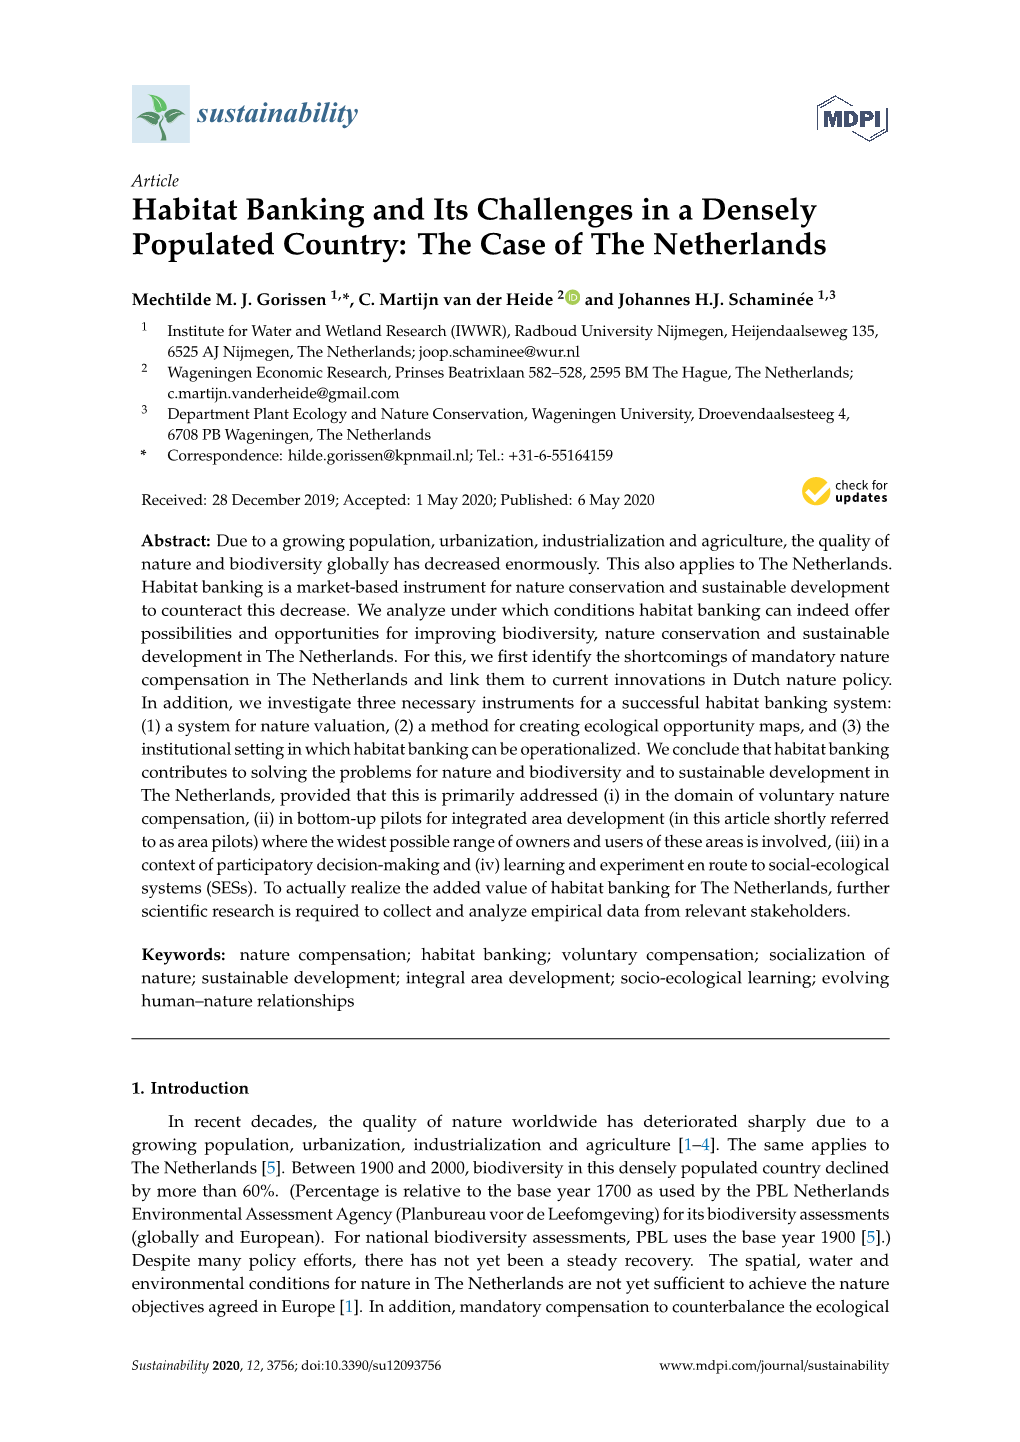 Habitat Banking and Its Challenges in a Densely Populated Country: the Case of the Netherlands